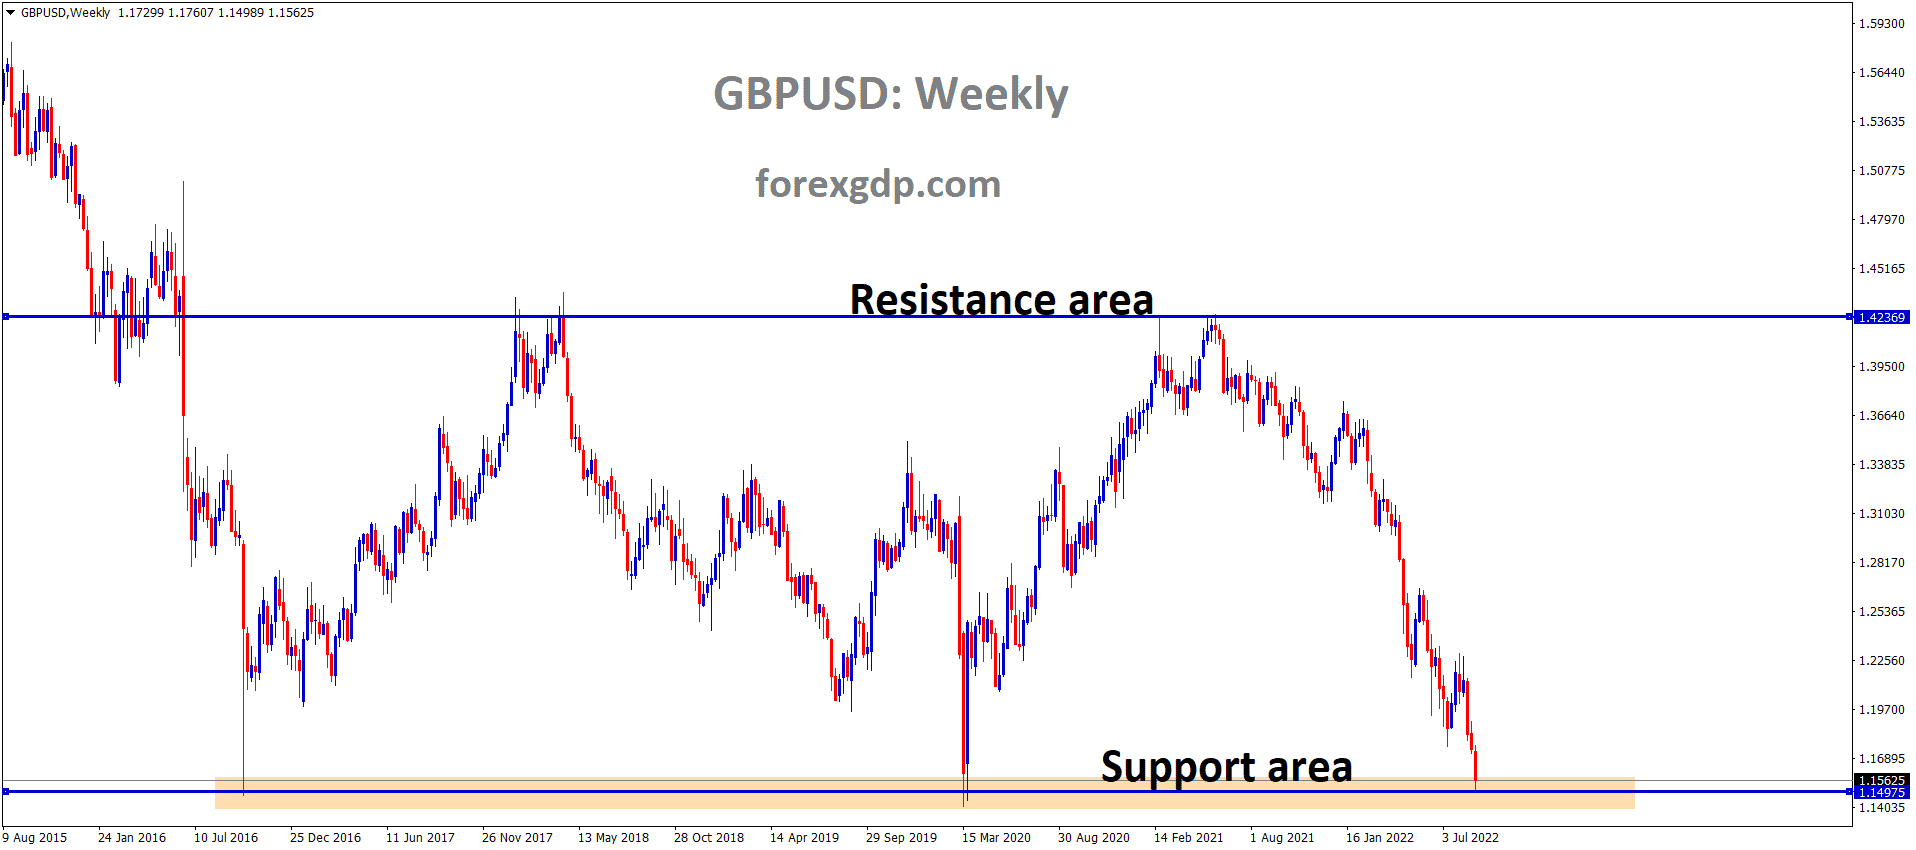 GBPUSD is moving in the Box pattern and the market has reached the horizontal support area of the pattern